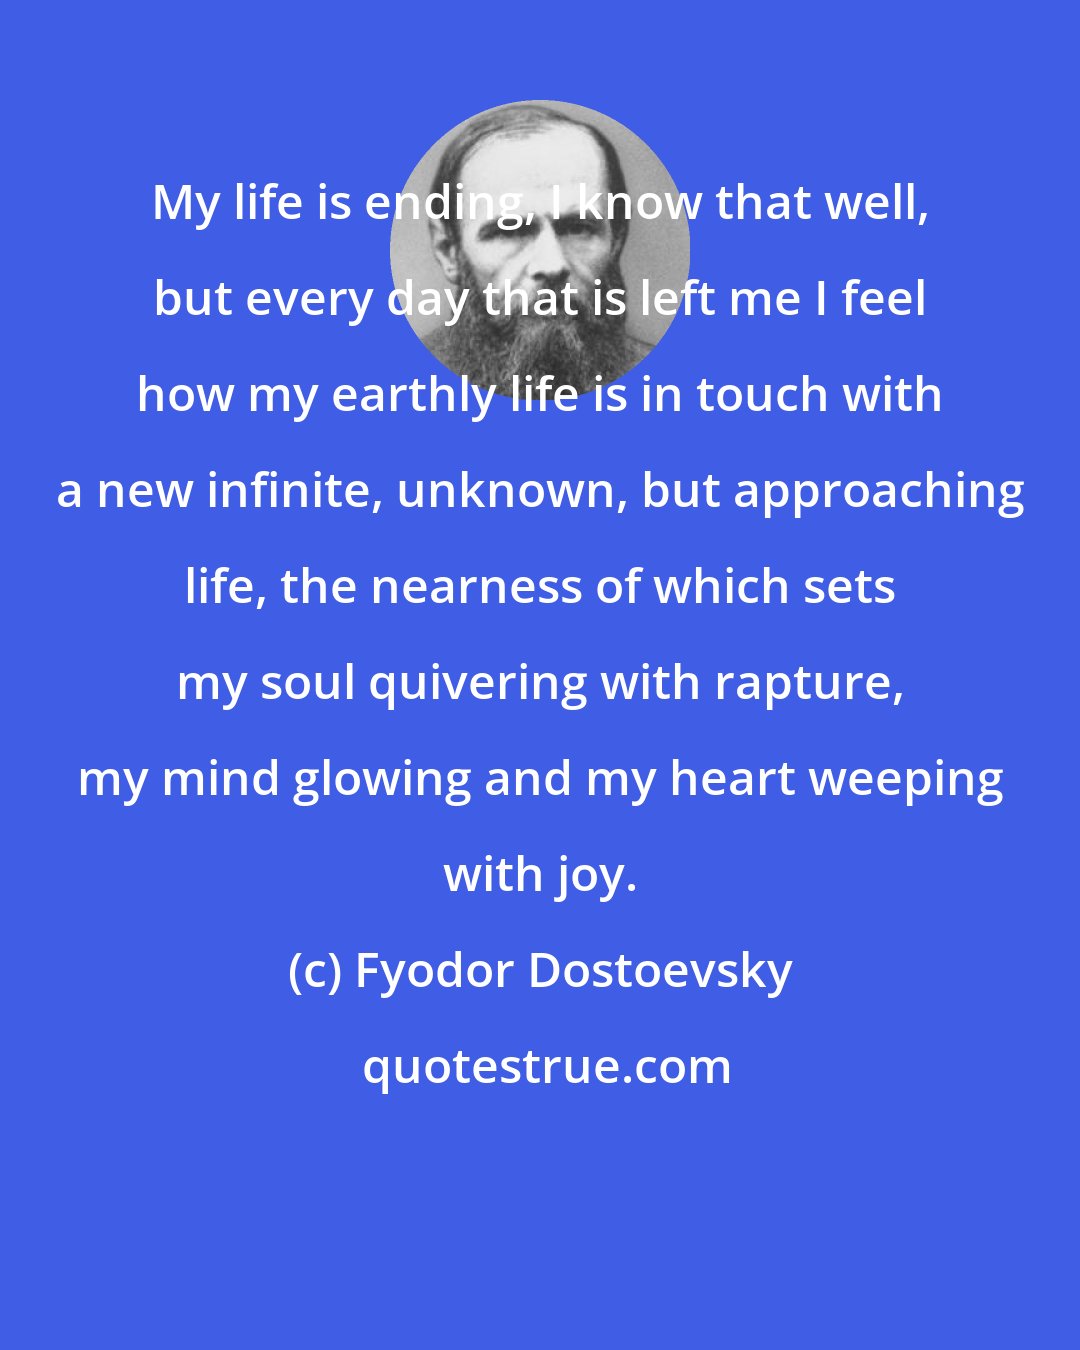 Fyodor Dostoevsky: My life is ending, I know that well, but every day that is left me I feel how my earthly life is in touch with a new infinite, unknown, but approaching life, the nearness of which sets my soul quivering with rapture, my mind glowing and my heart weeping with joy.